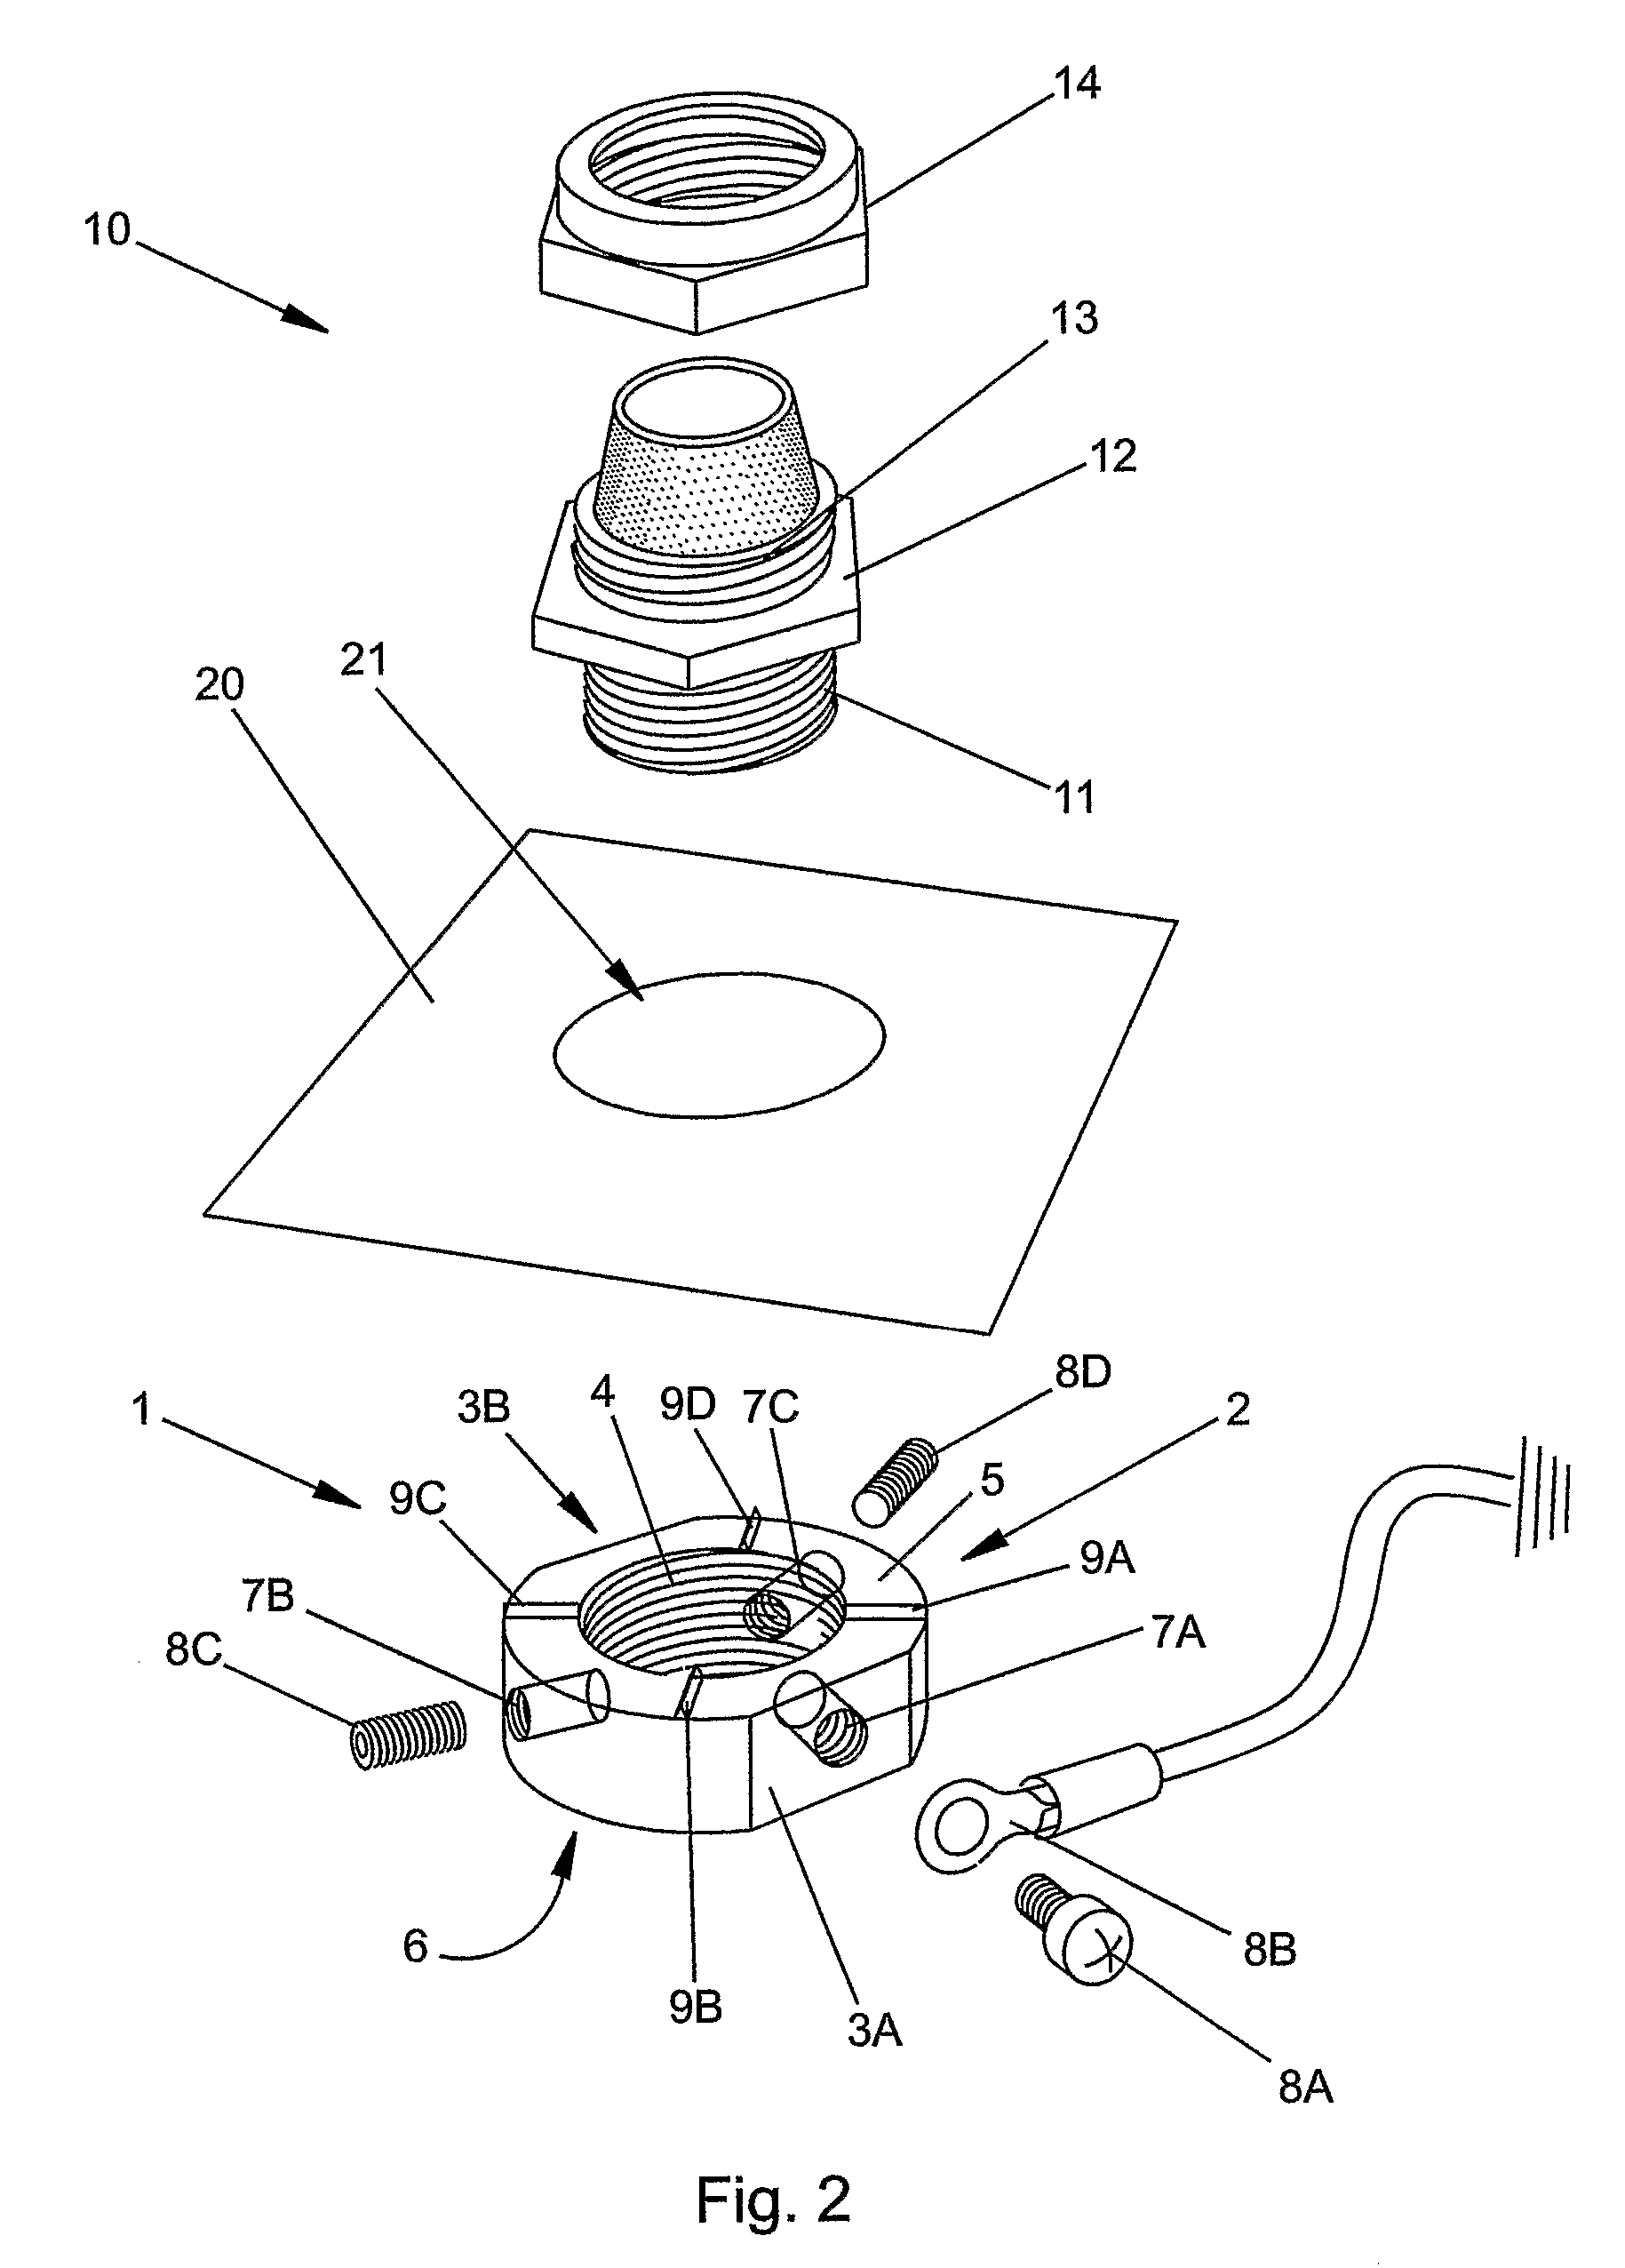 Electrical earthing nut